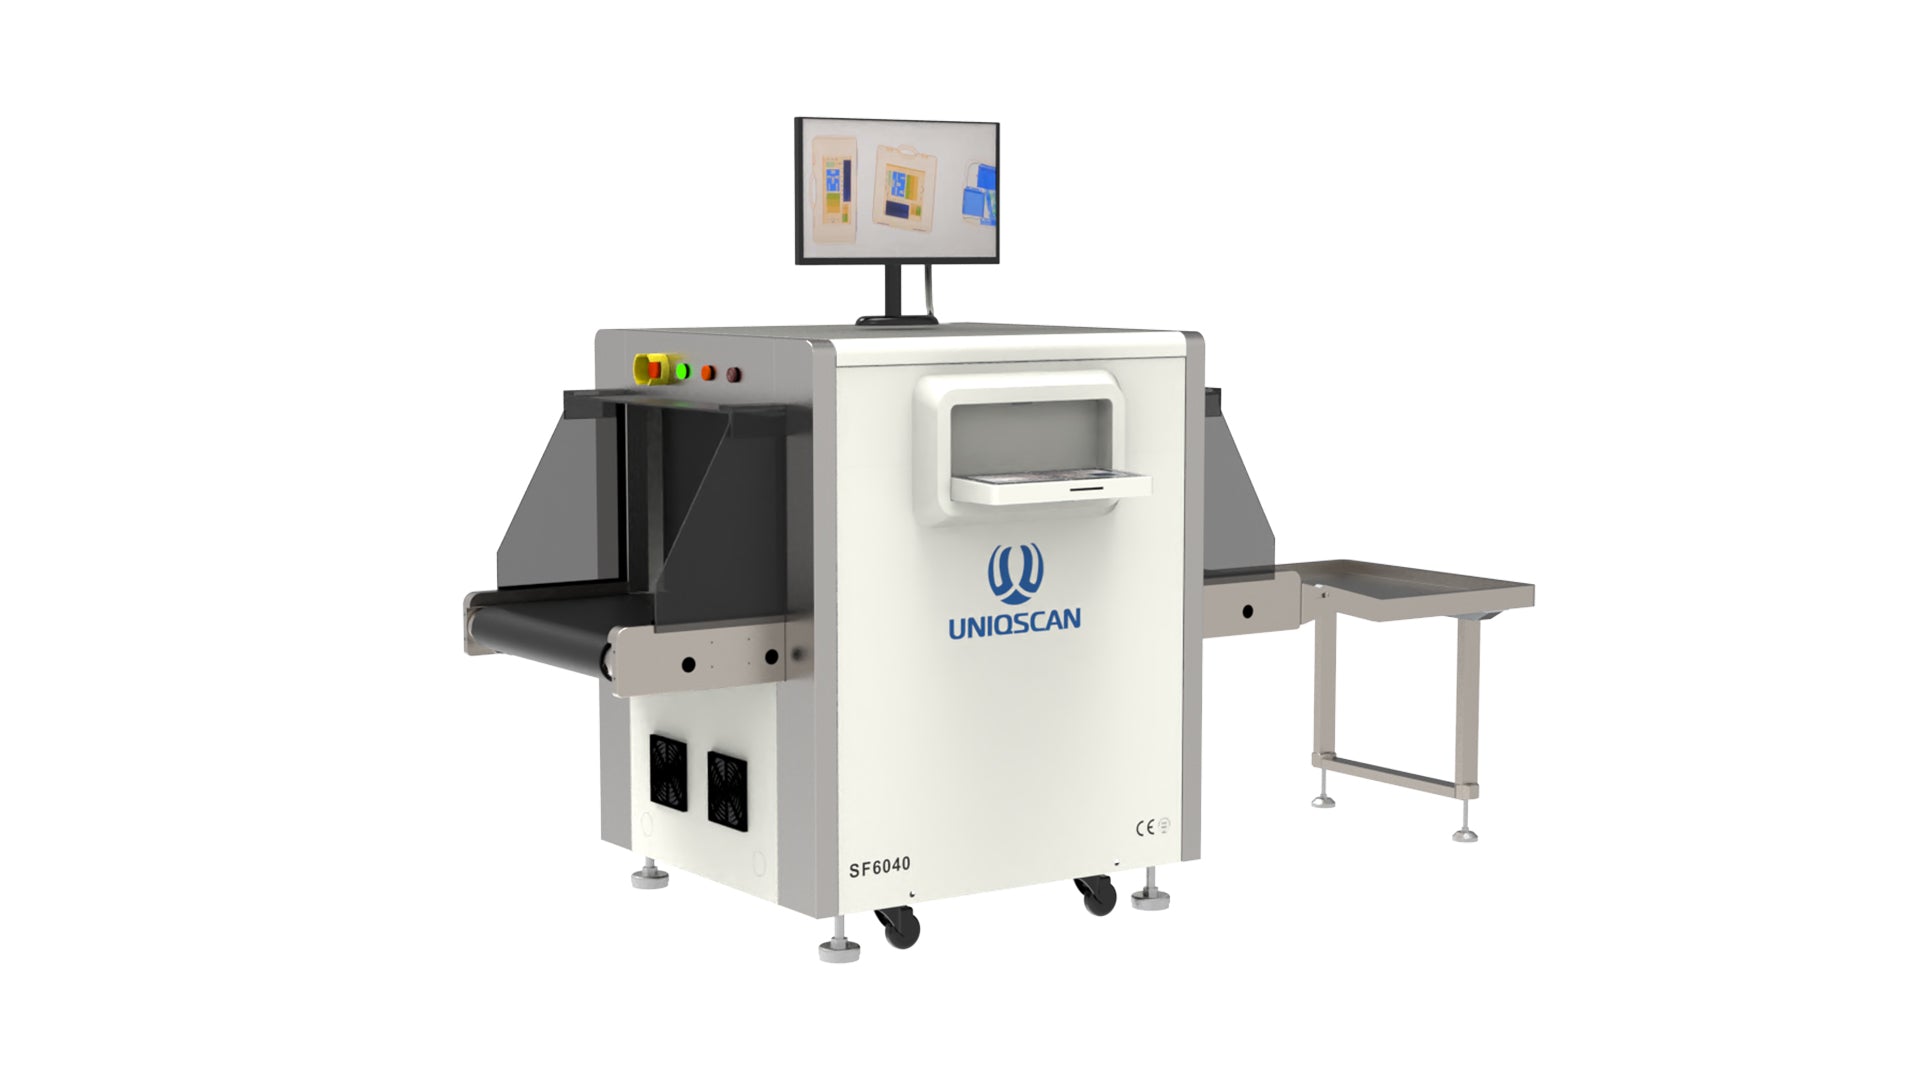 X-ray Baggage Scanner: SF10080D